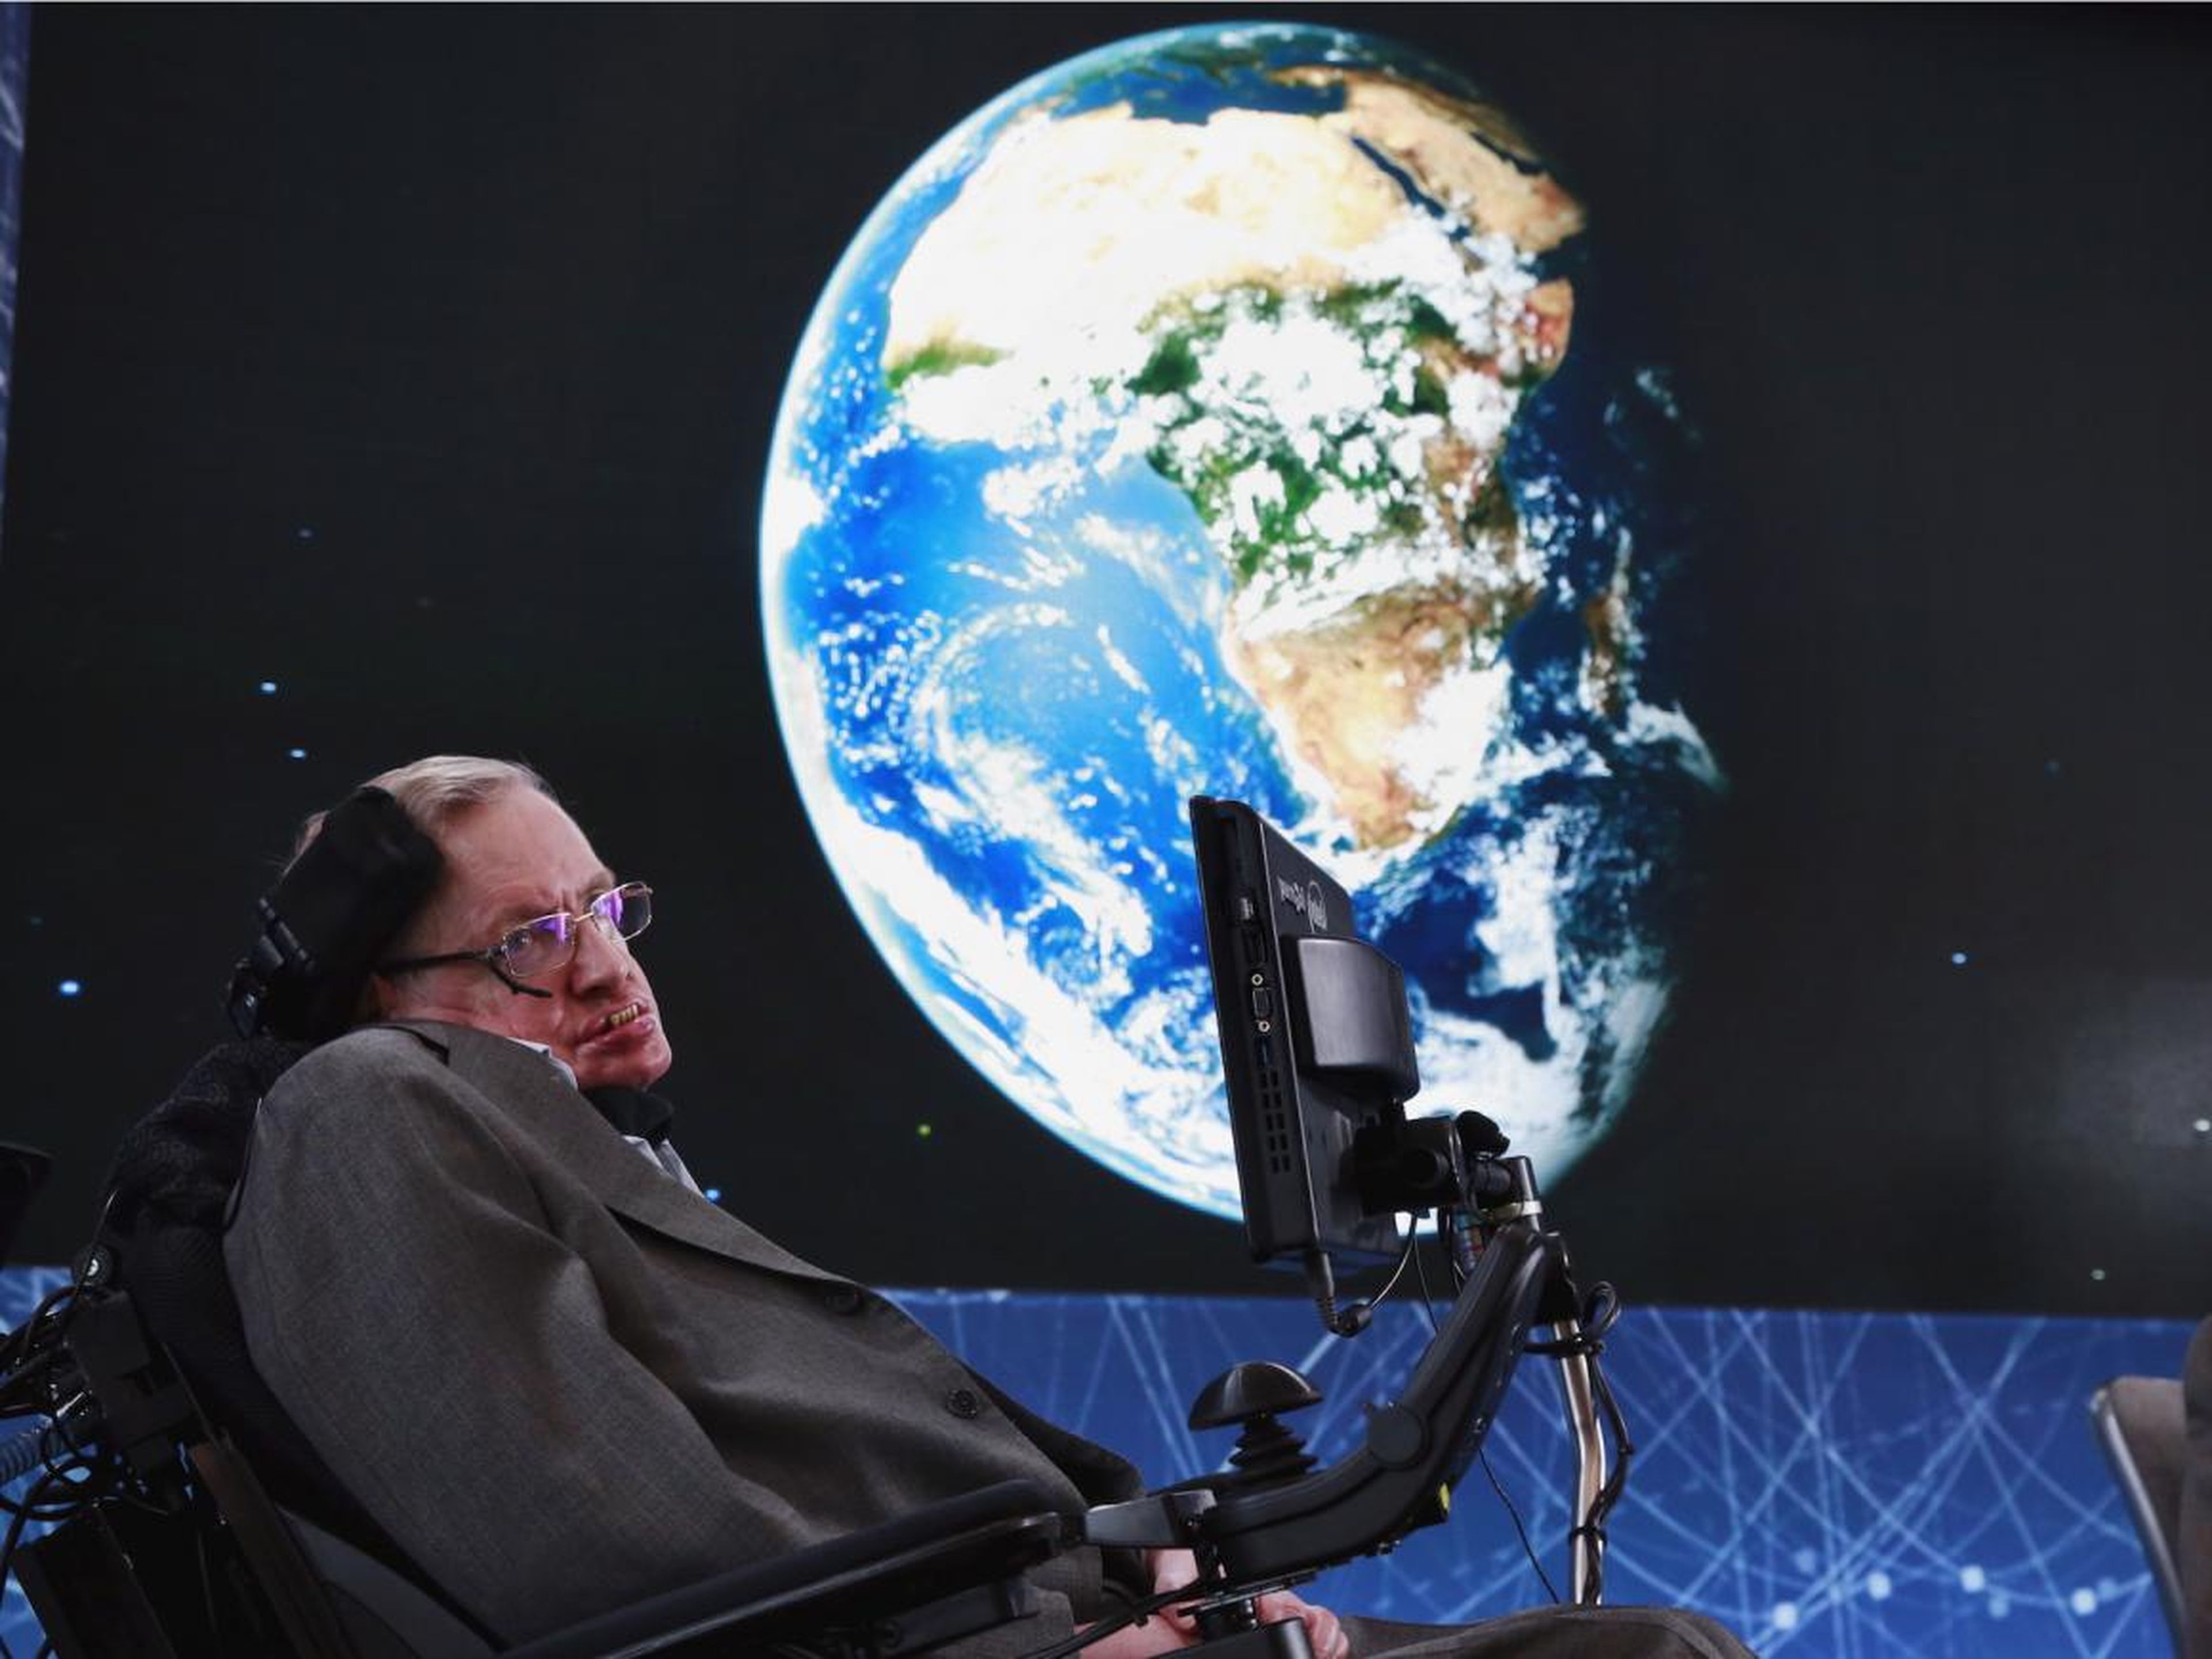 Stephen Hawking sits on stage during an announcement of the Breakthrough Starshot initiative with investor Yuri Milner in New York, April 12, 2016.